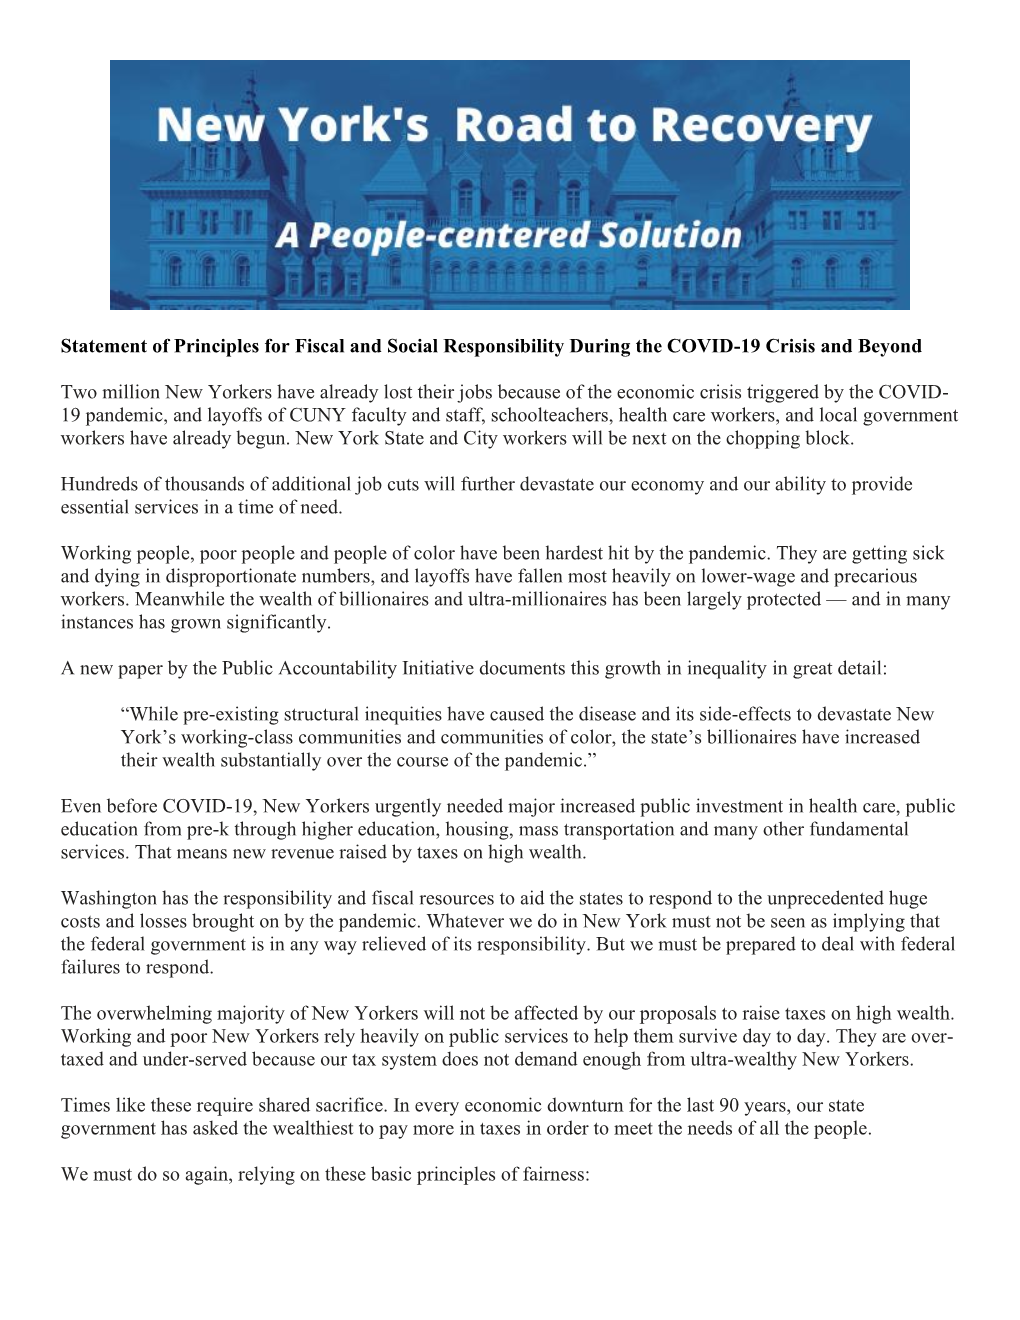 Statement of Principles for Fiscal and Social Responsibility During the COVID-19 Crisis and Beyond Two Million New Yorkers Have